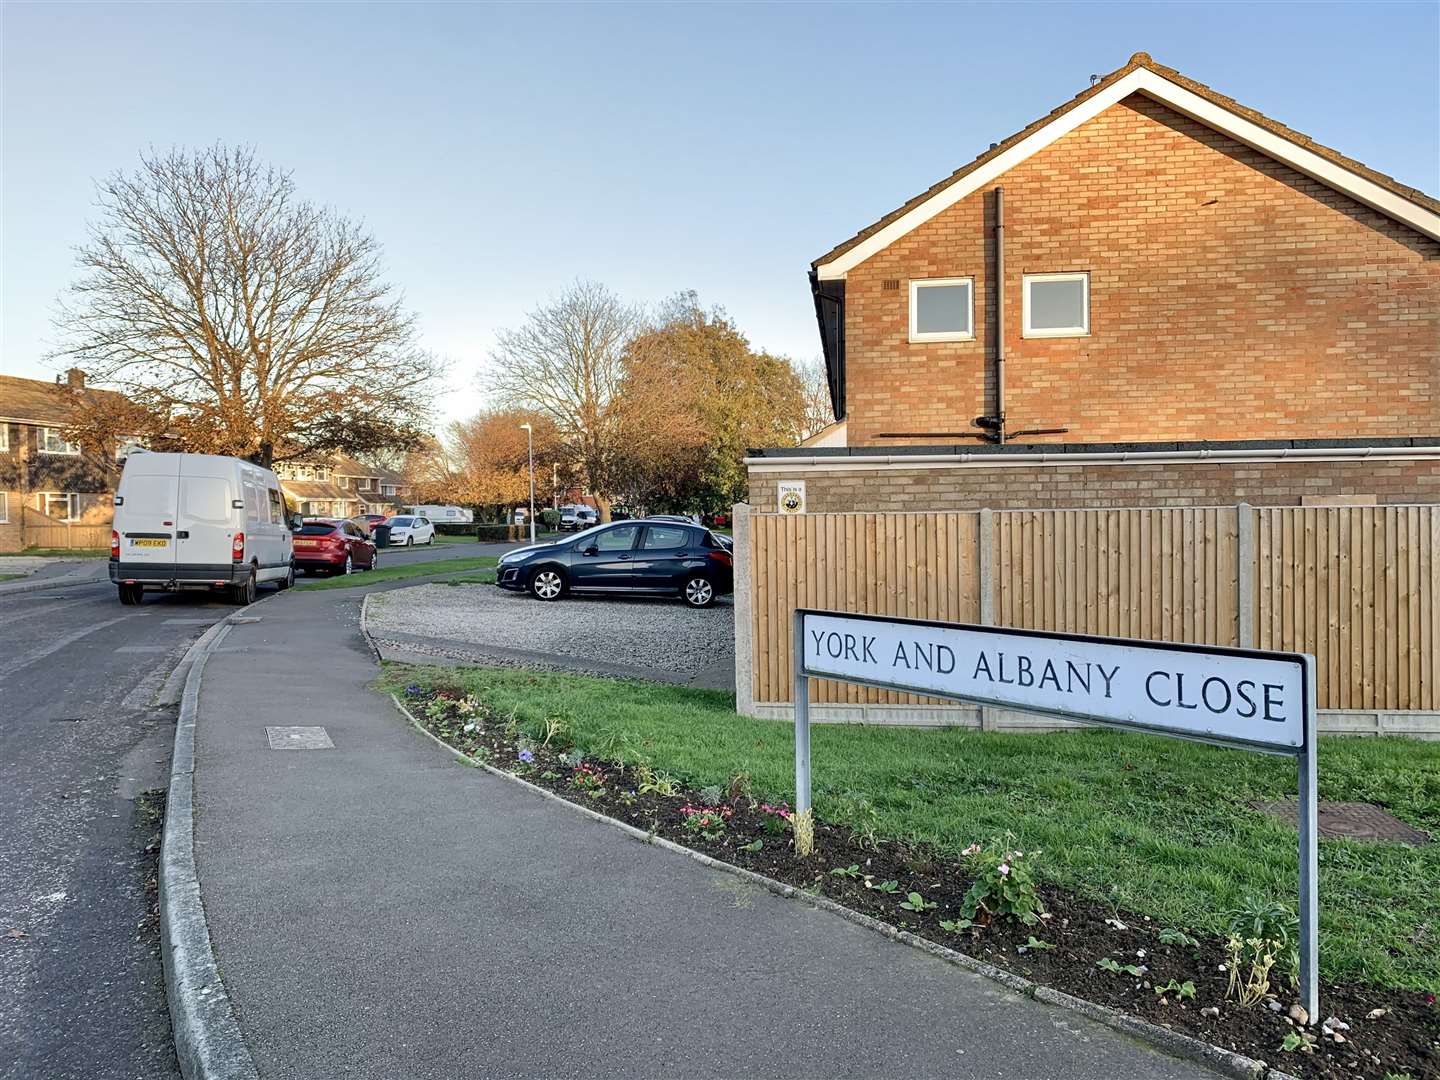 Walmer Parish Council is proposing to build eight homes for young people in York and Albany Close